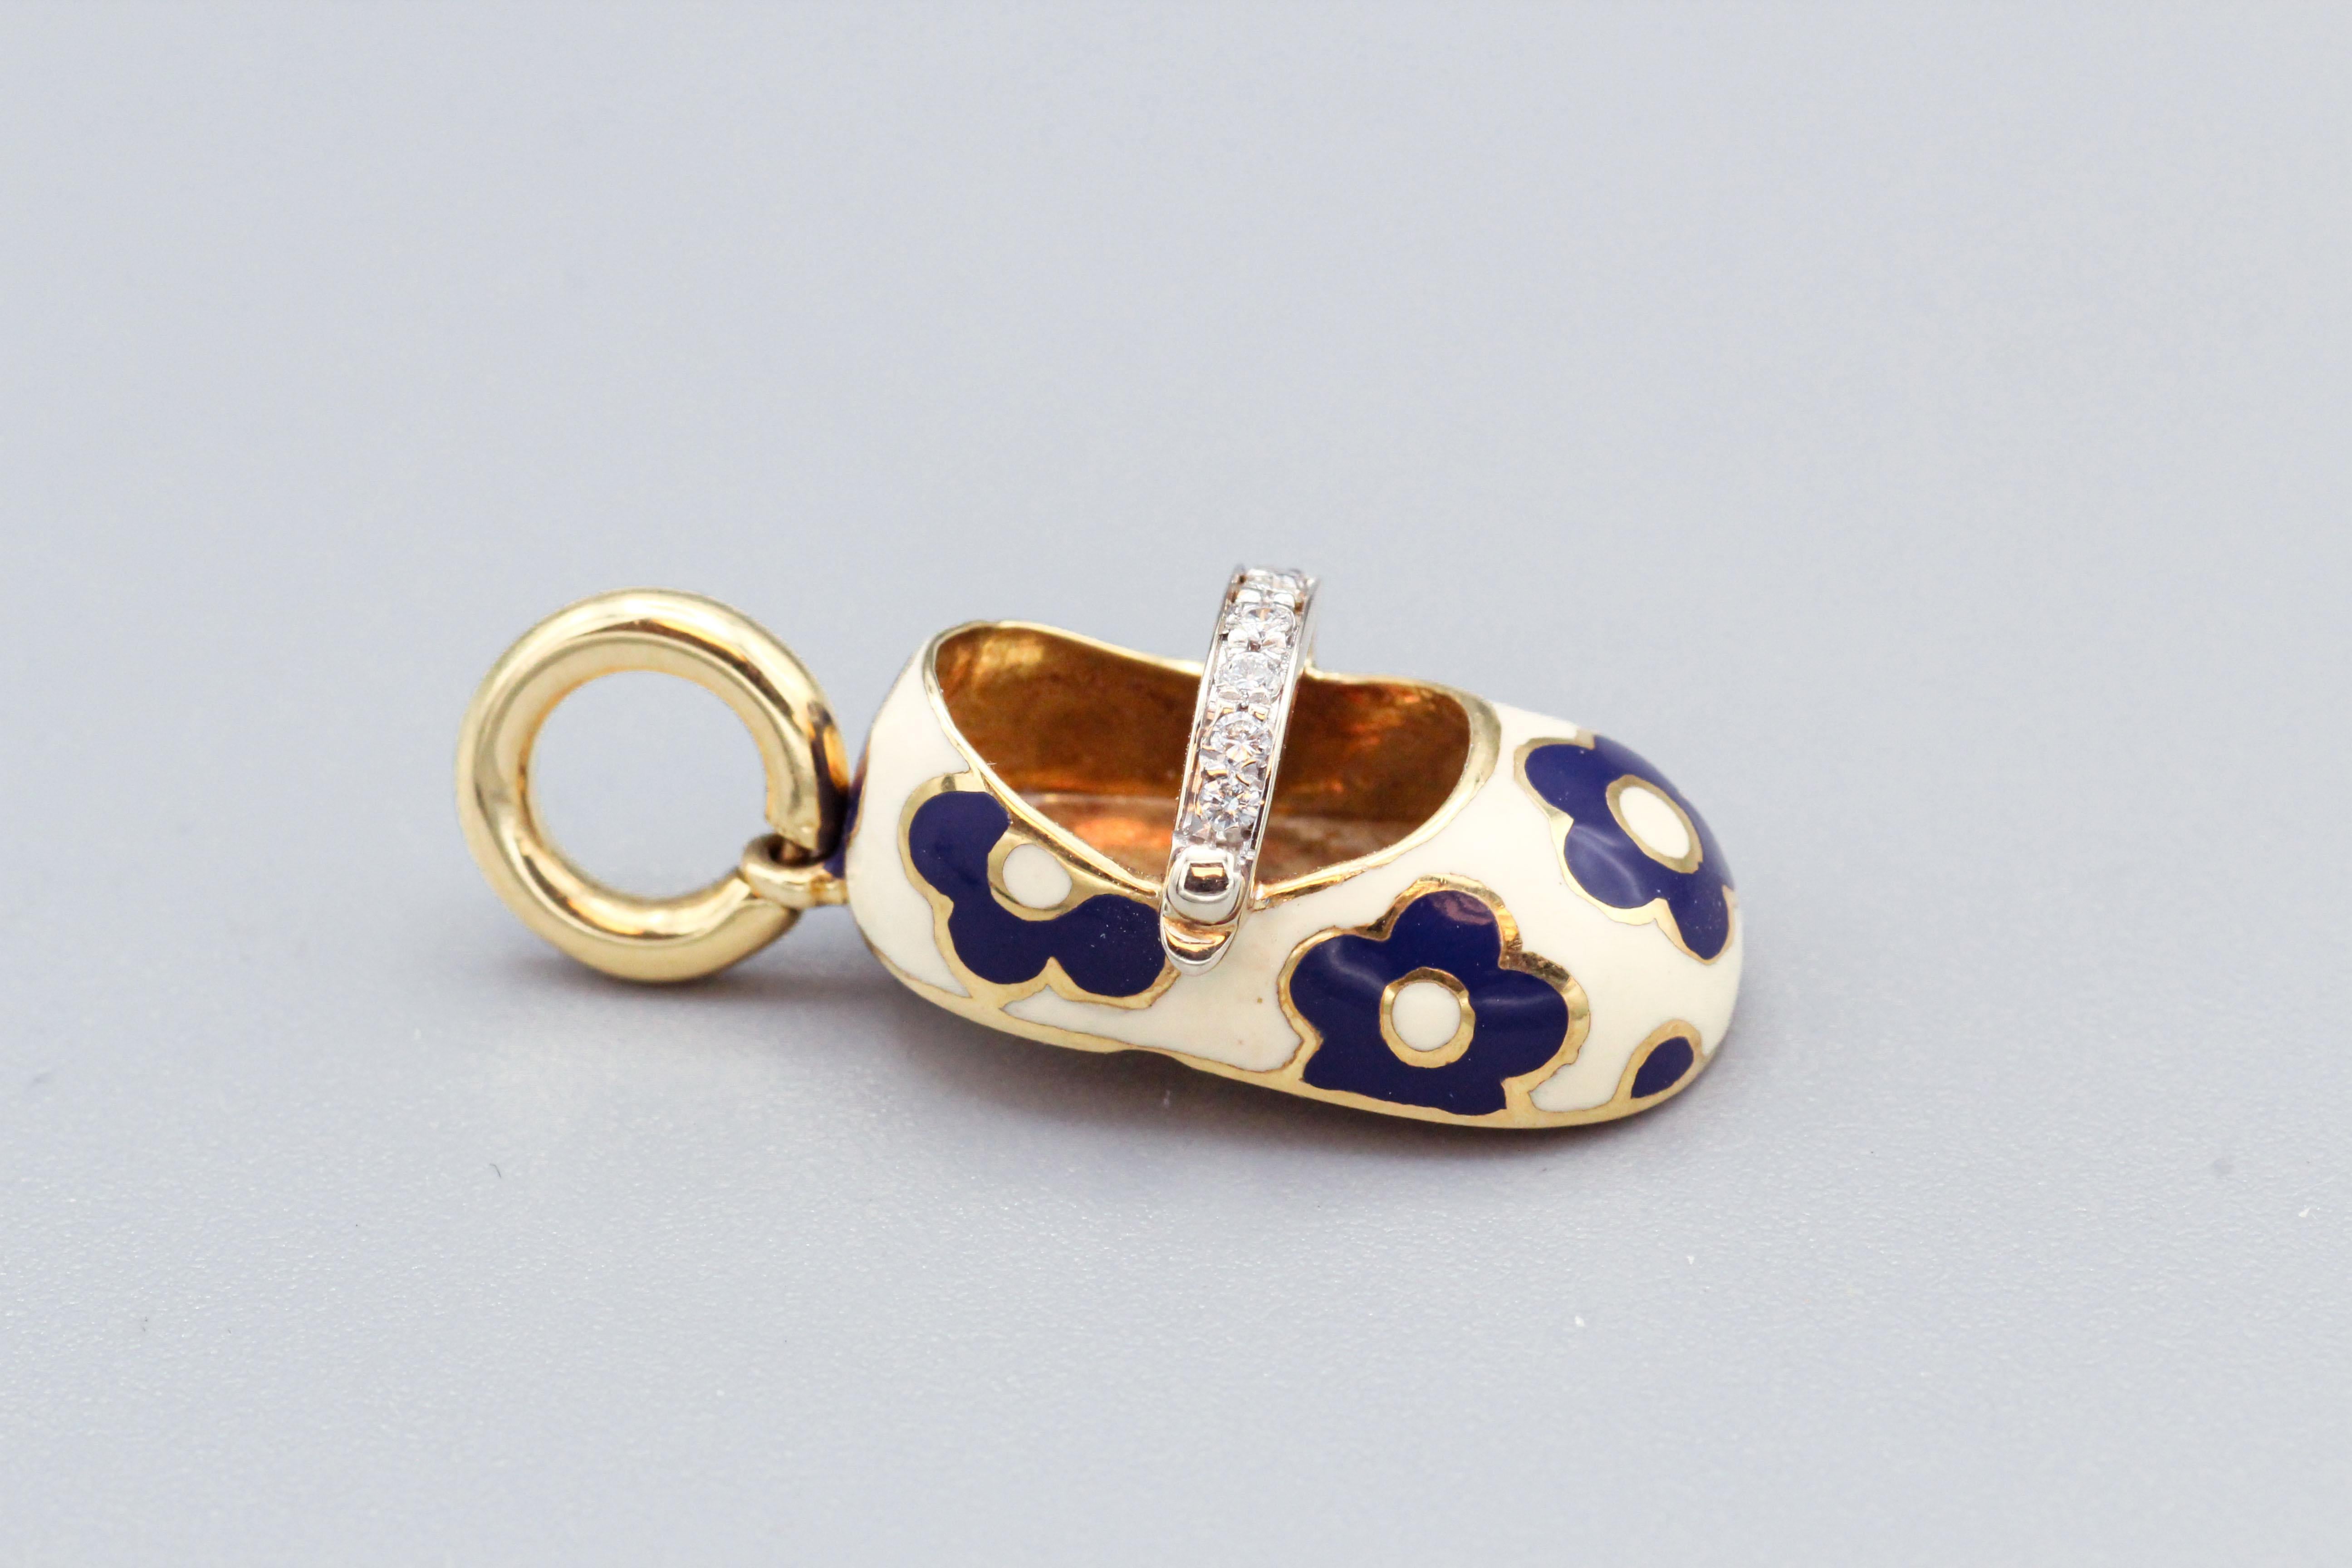 Aaron Basha Diamond Enamel 18k Gold  Flower Motif Baby Girl Shoe Charm Pendant In Good Condition For Sale In Bellmore, NY